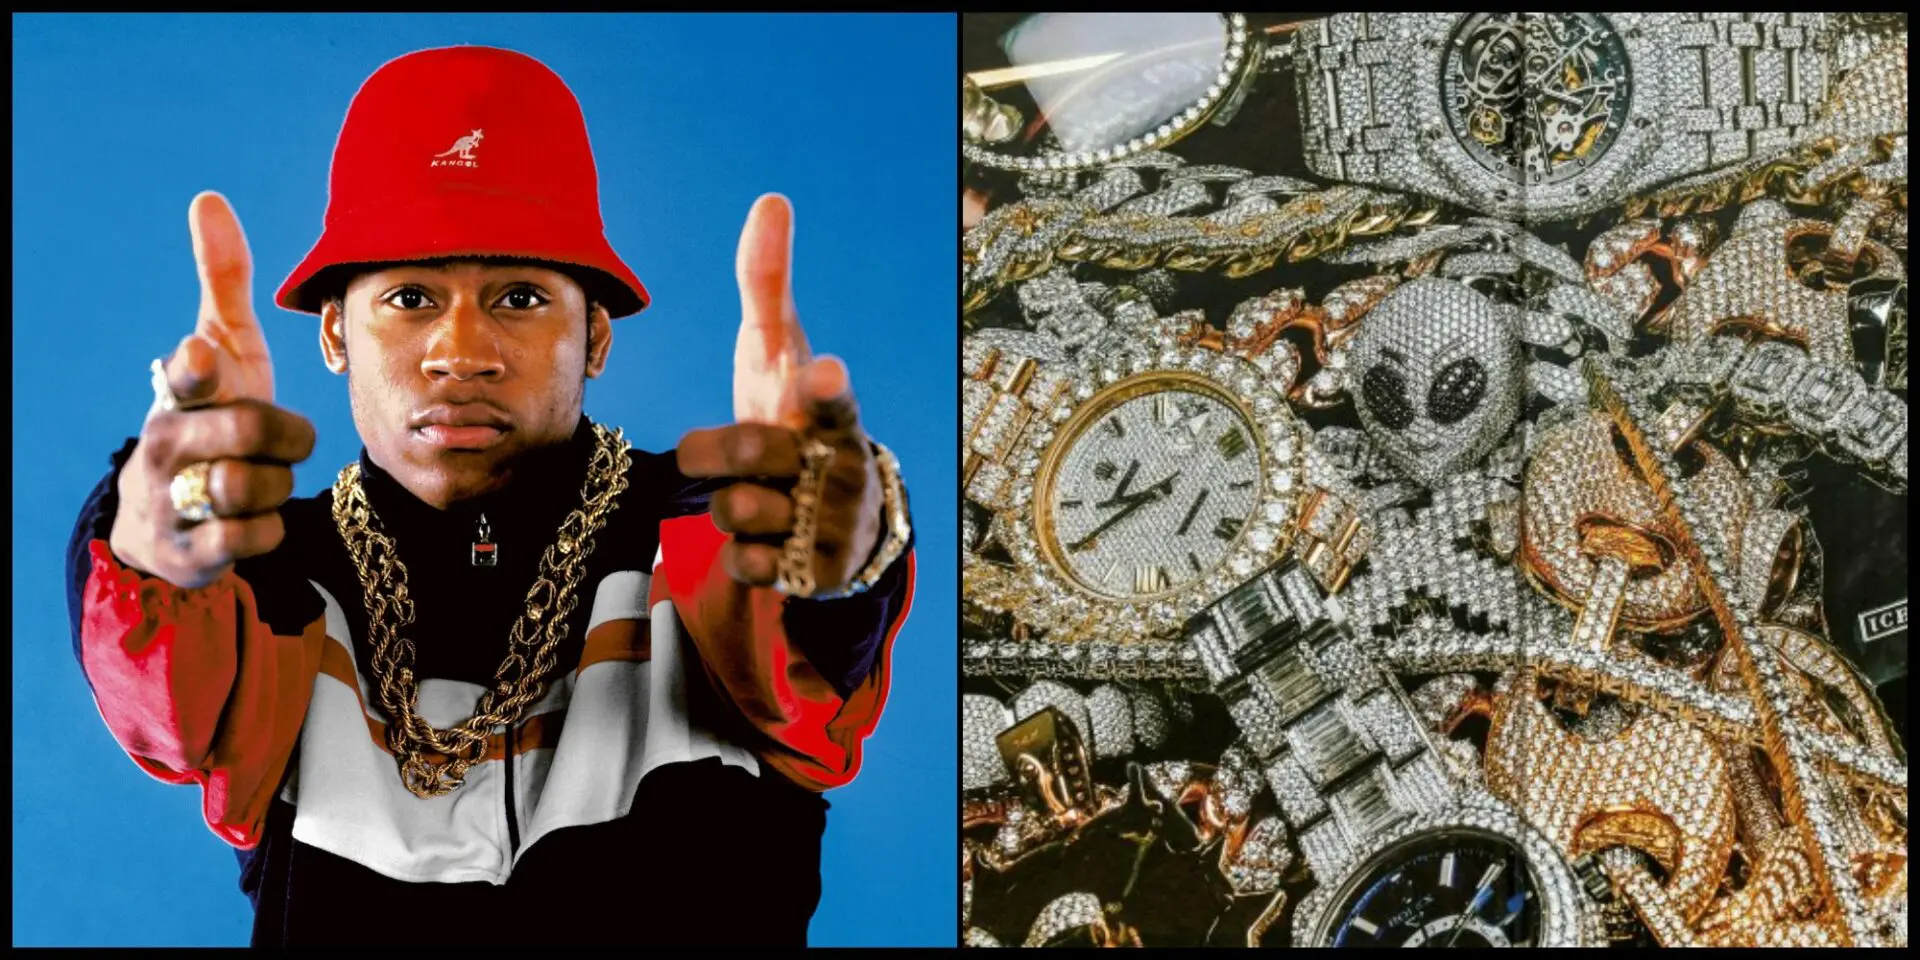 ICE COLD: HIP HOP JEWELRY – The Ozone